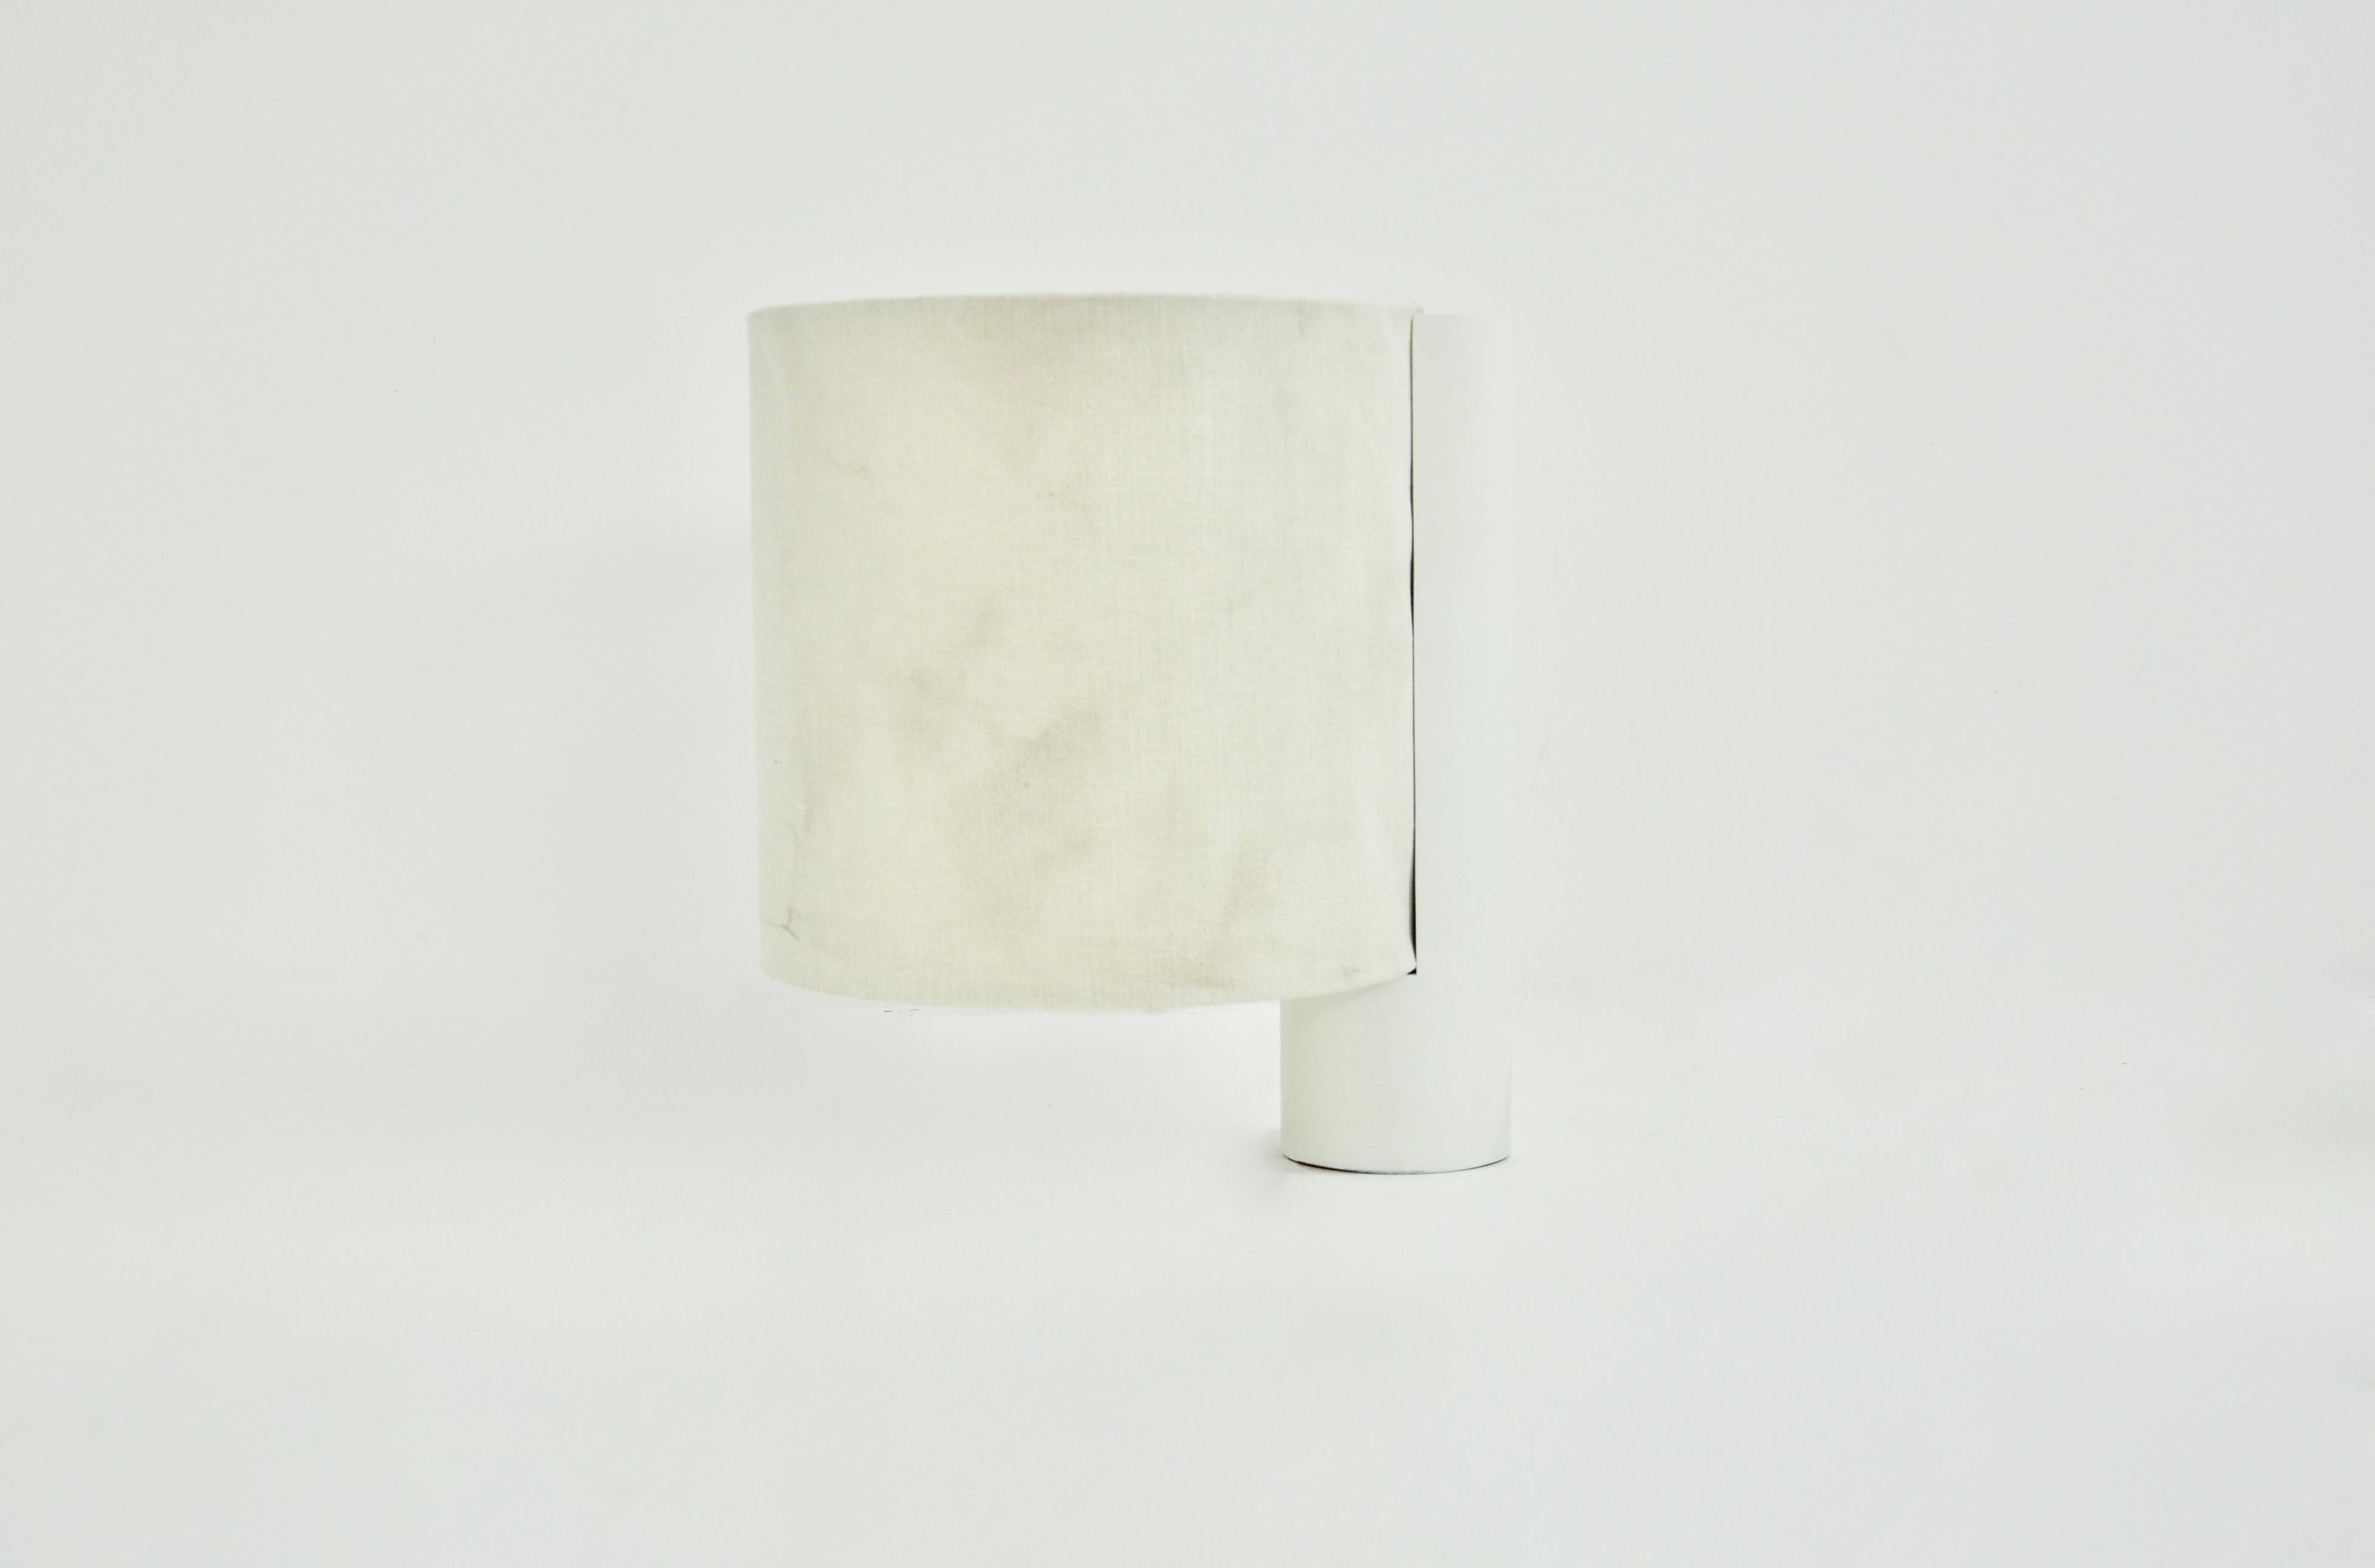 Large white lamp with metal base and fabric shade designed by Giulana Gamigna. Model: Fluette.  Possibility of lighting only the bottom or the top or even both sides of the lamp. Wear due to time and age of the lamps